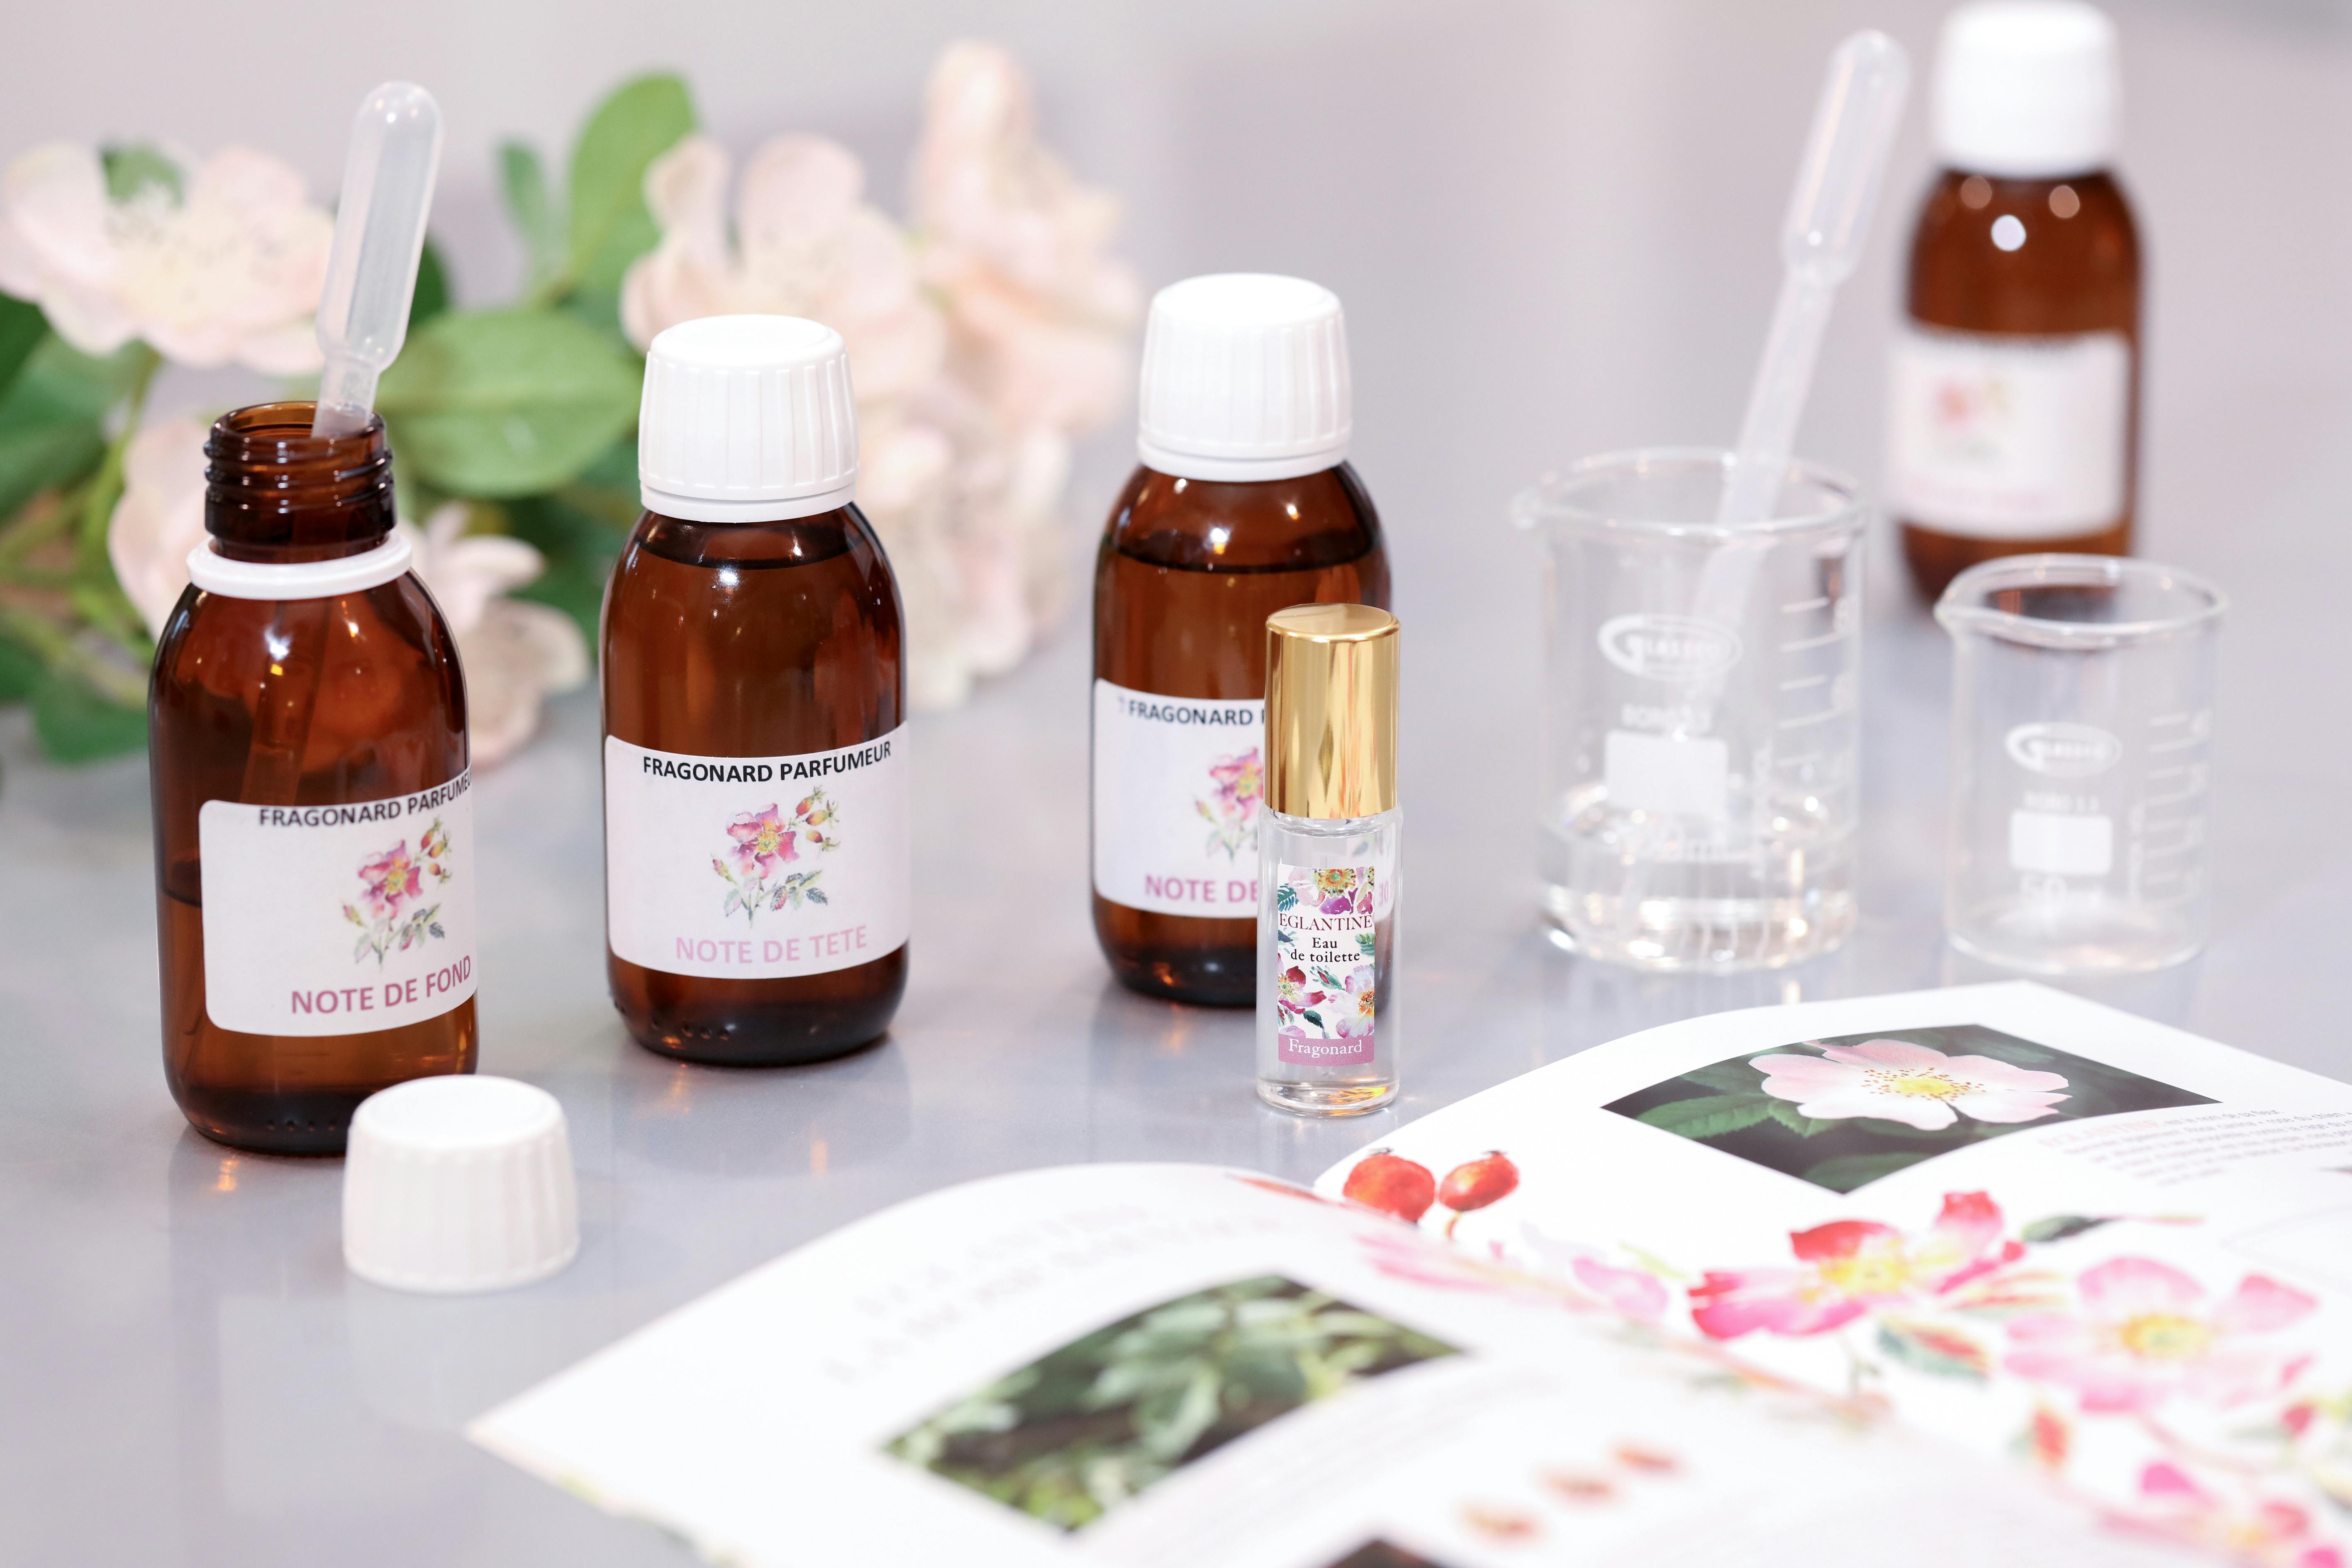 Fragonard Perfumes & Cosmetics lab guided visit with workshop in Èze